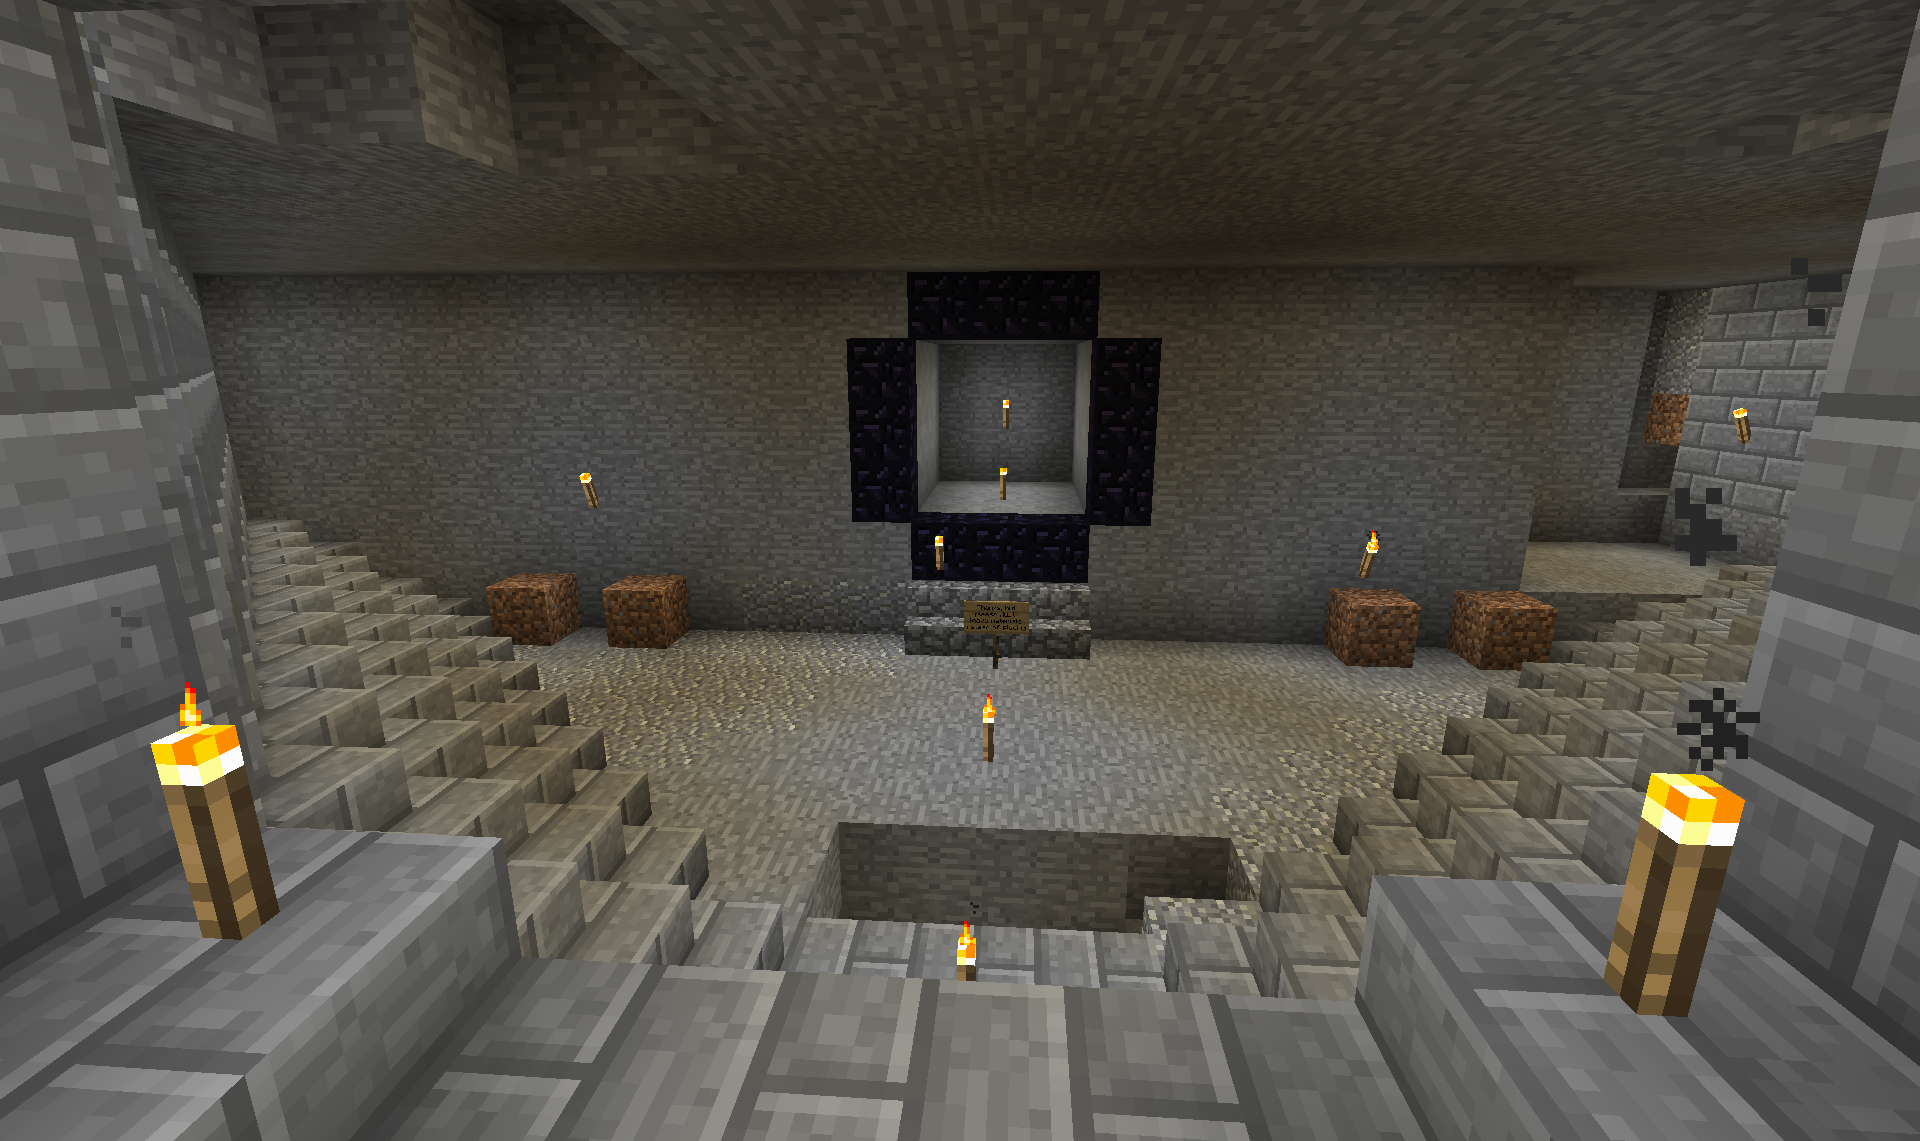 The nether portal room proper. That's... not how I want the the portal to look, but that was a gift from another person I said could stay in one of the rooms in the living quarters. I'll have to take it down and remake it in a really sweet cool-looking fashion.